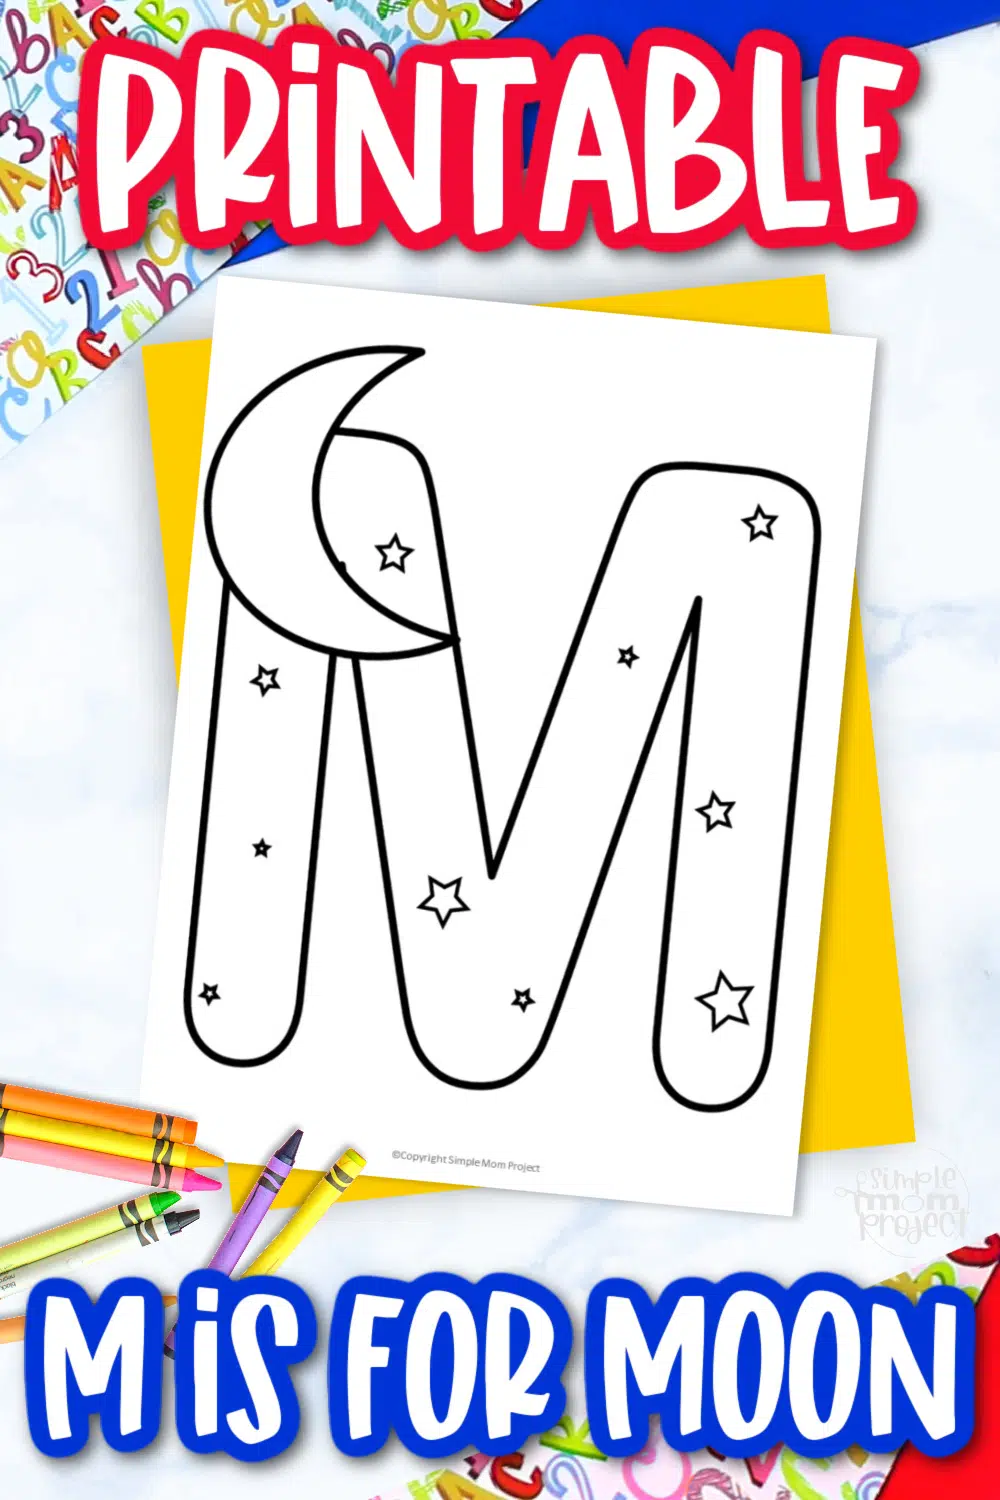 Free printable letter c coloring page â simple mom project